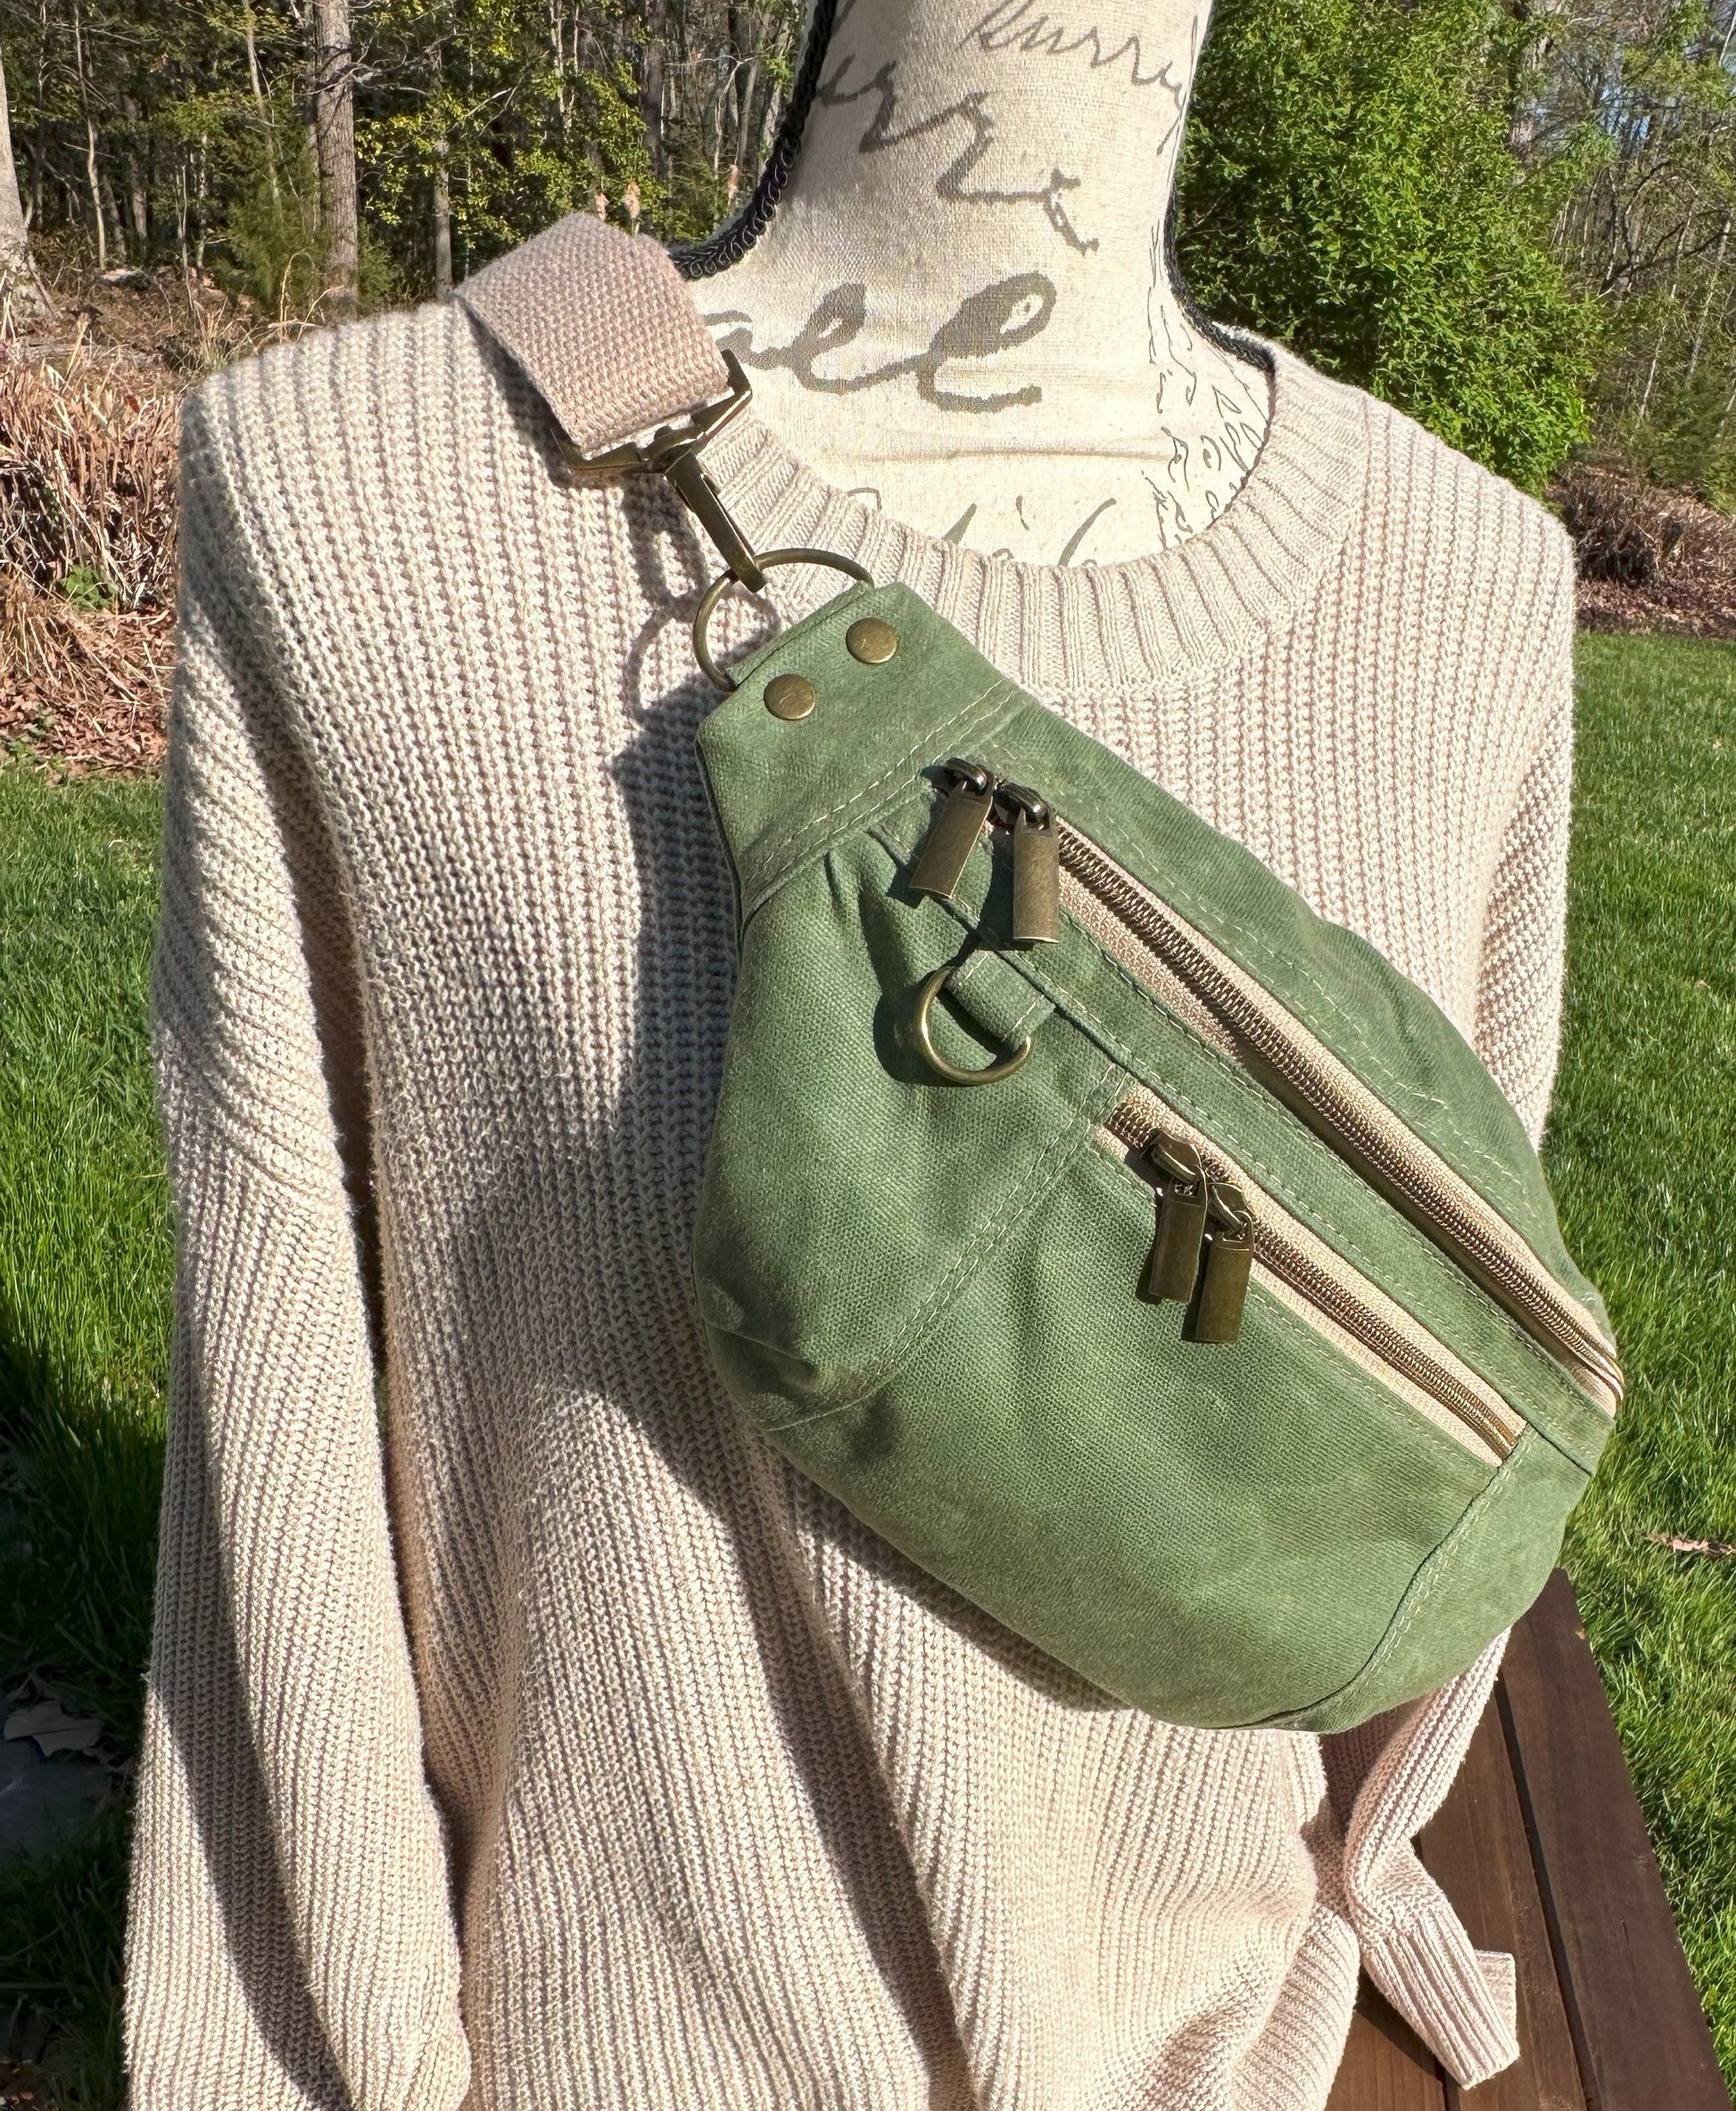 Sage Green Waxed Canvas Antique Brass Hardware Jib Hip Bag Sling squirescanvascreations.com